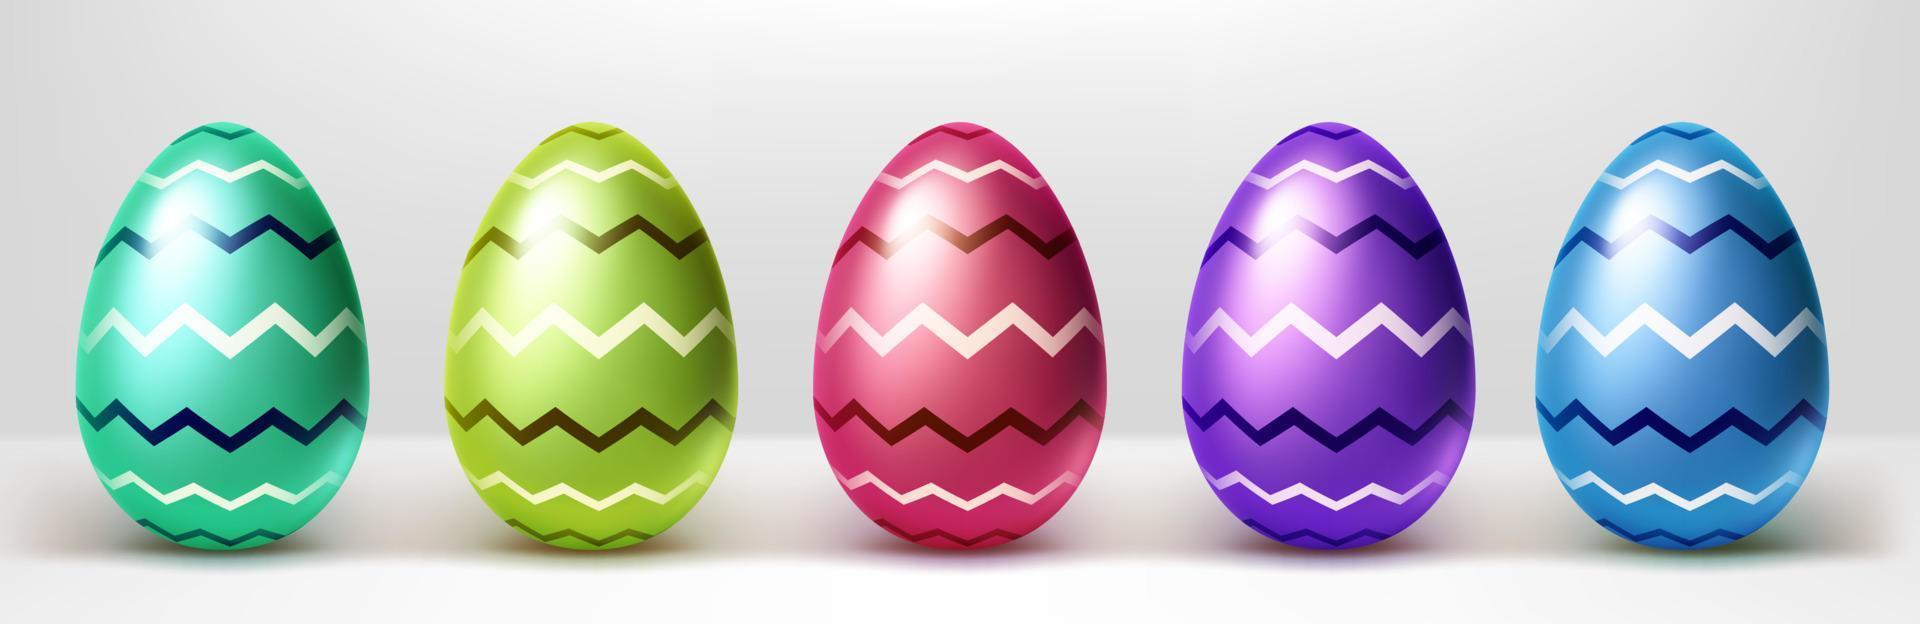 Colorful Easter eggs with zigzag lines pattern vector